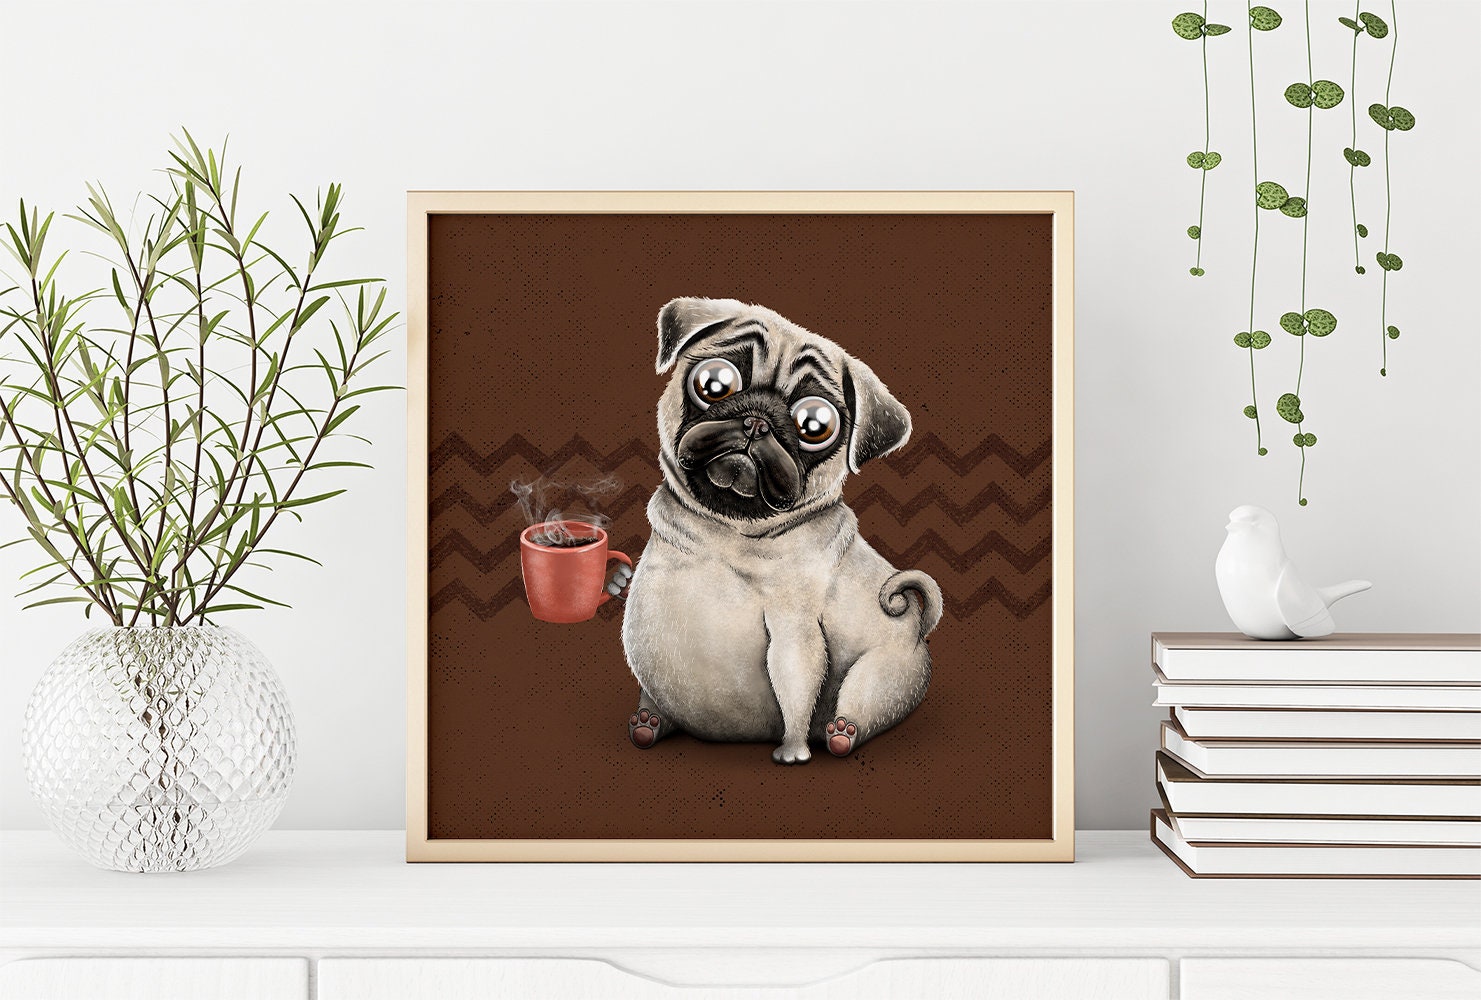 pug, boxing, boxing gloves gift idea Poster by Eichberger91